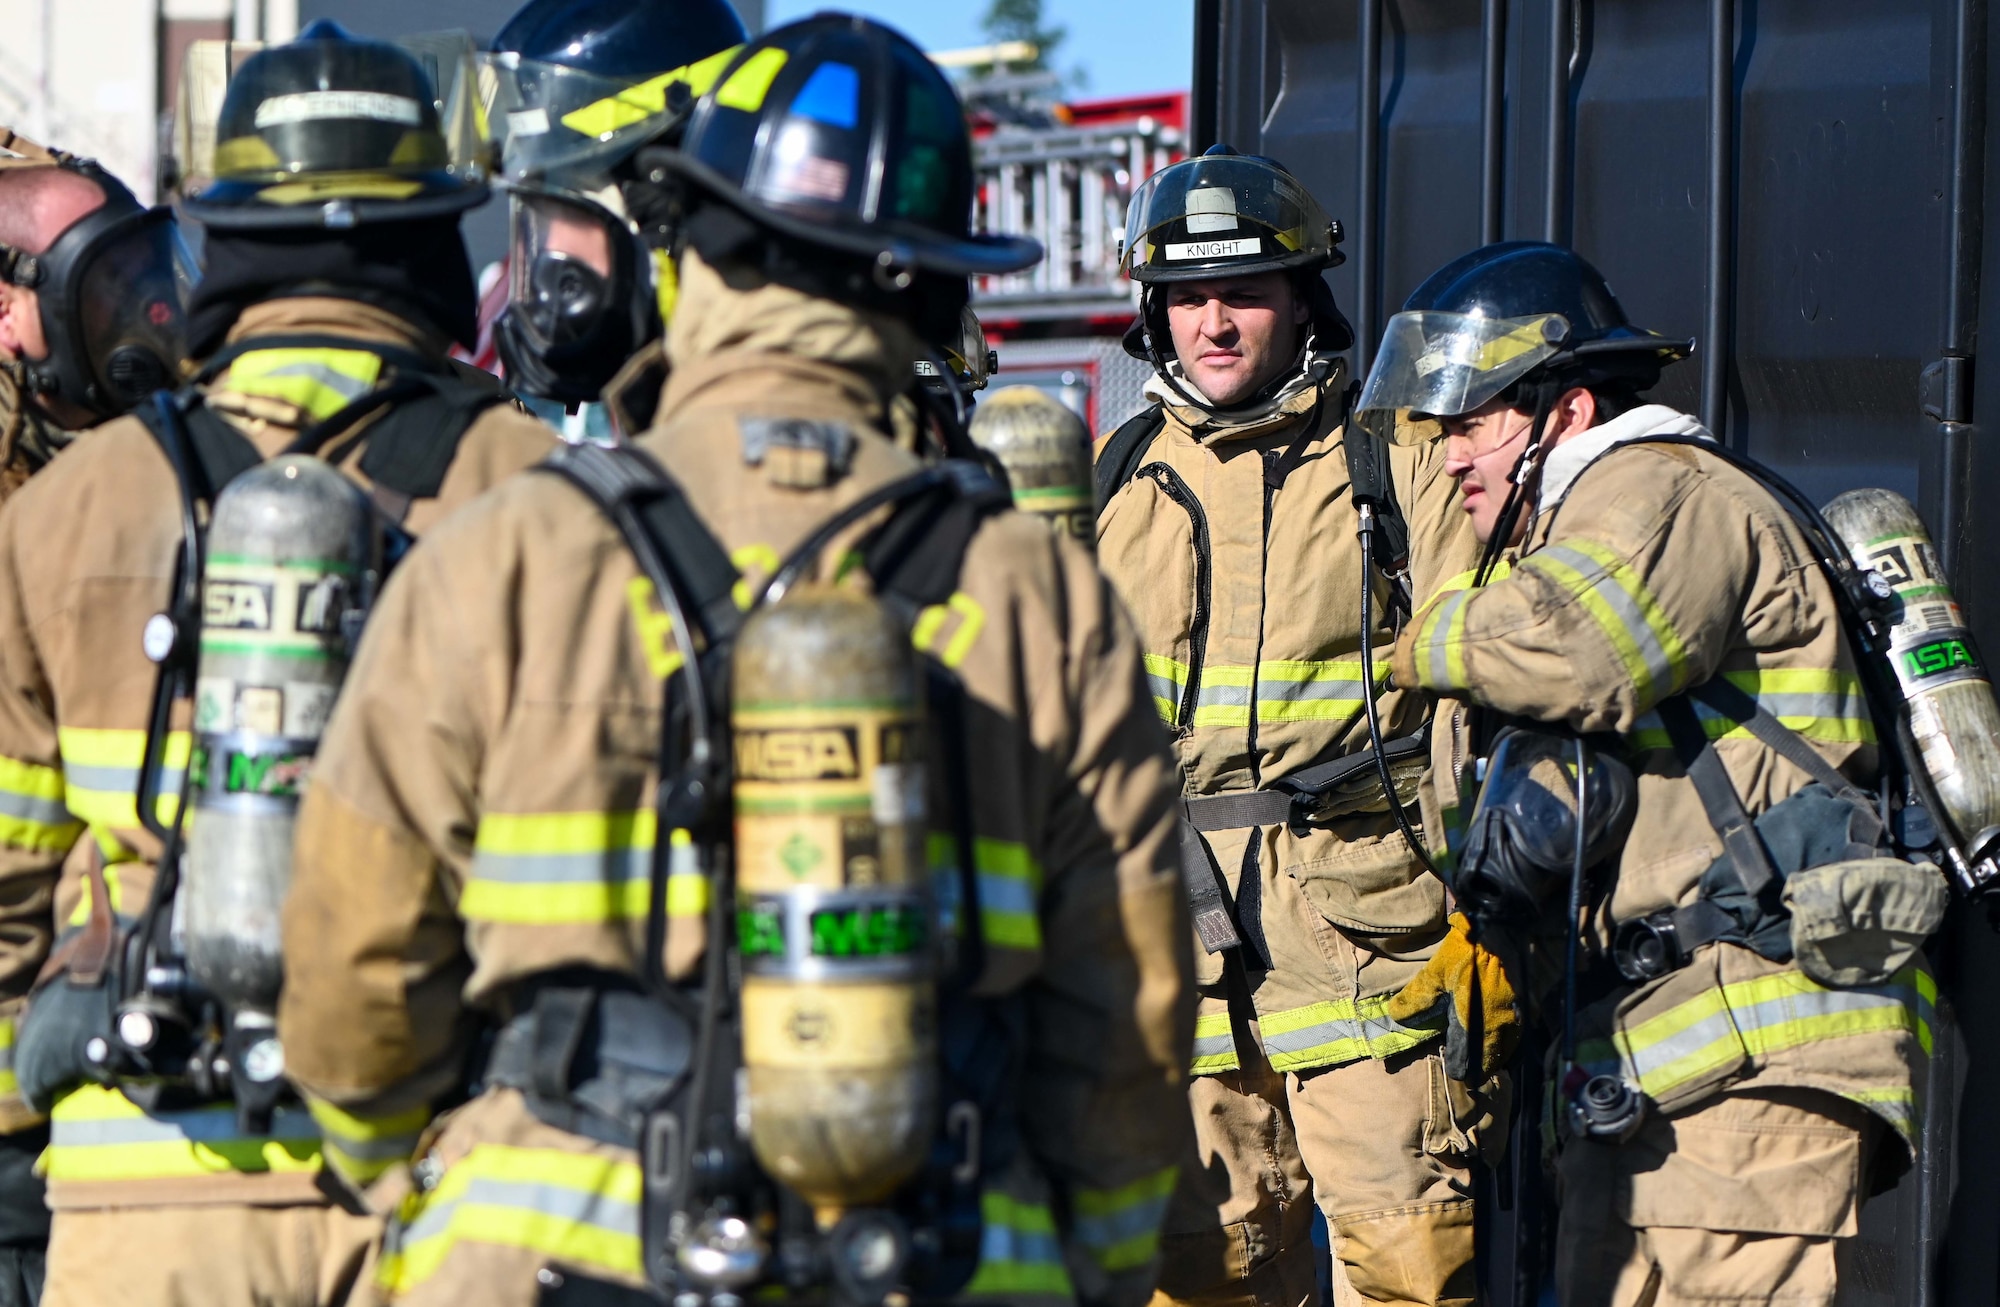 University-Oklahoma City fire academy during live fire scenarios November 16, 2022 at Tinker Air Force Base, Oklahoma. This training allows the students to complete necessary certifications to enable them to find jobs in the local area as well as strengthens the bond between Tinker AFB and its surrounding communities.